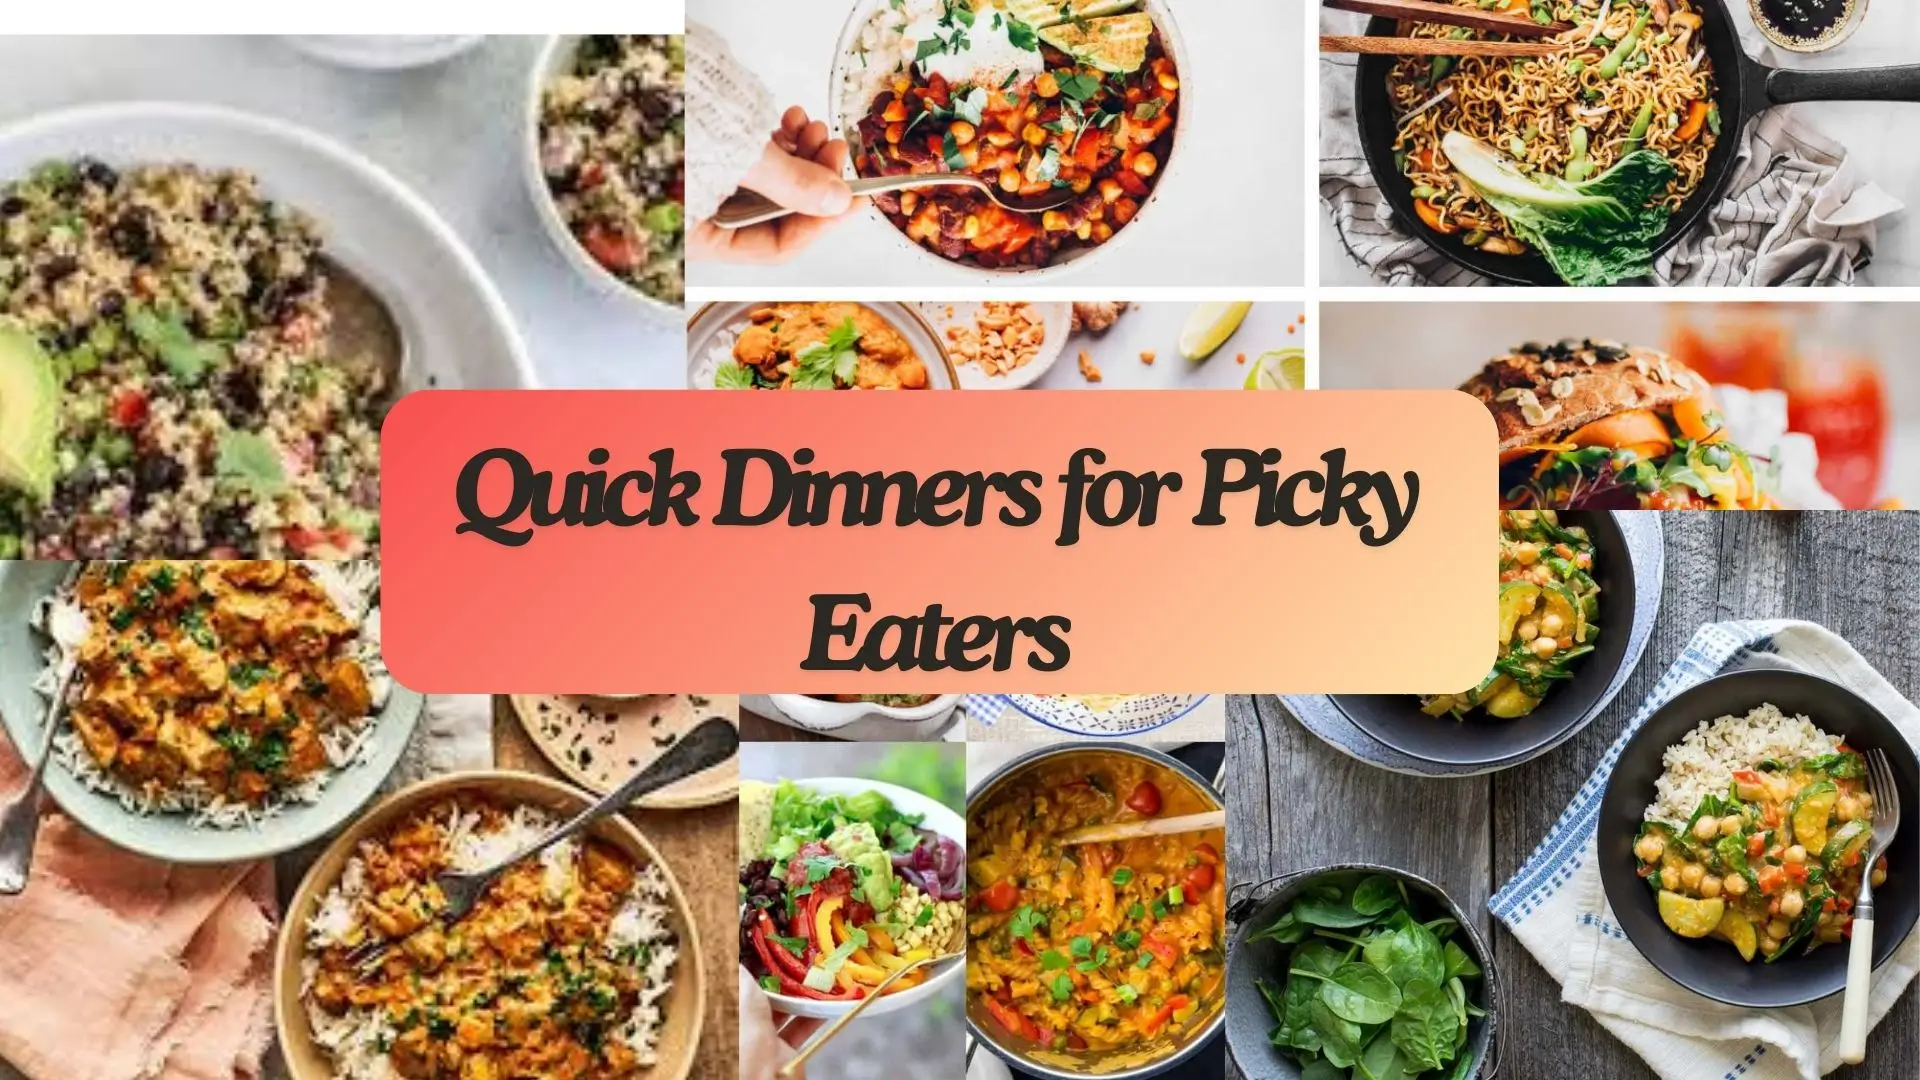 Quick Dinners for Picky Eaters 40 Super Quick and Simple Recipes